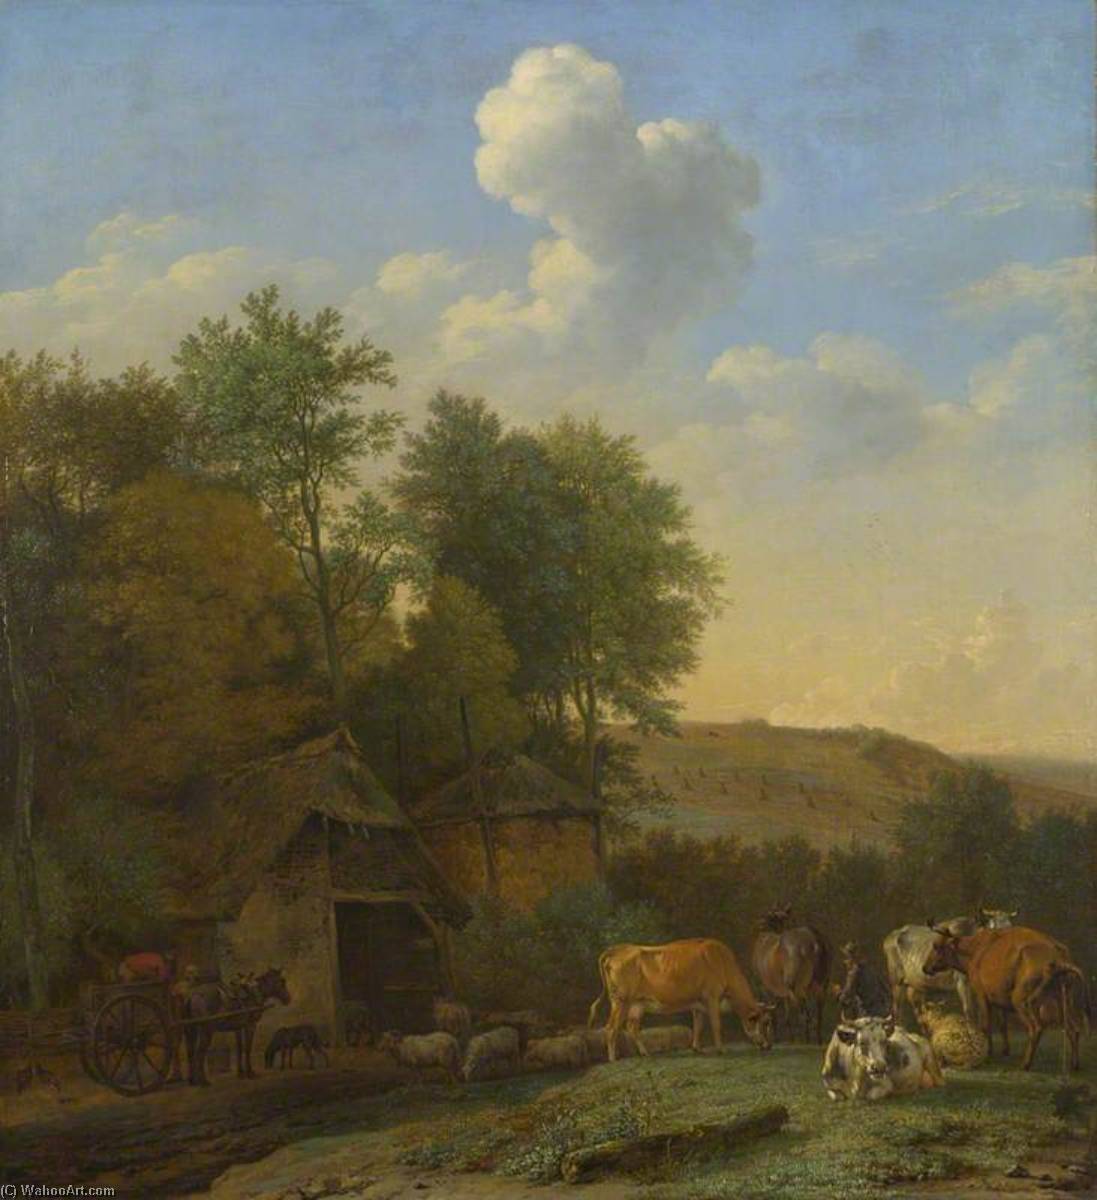 WikiOO.org - Güzel Sanatlar Ansiklopedisi - Resim, Resimler Paulus Potter - A Landscape with Cows, Sheep and Horses by a Barn